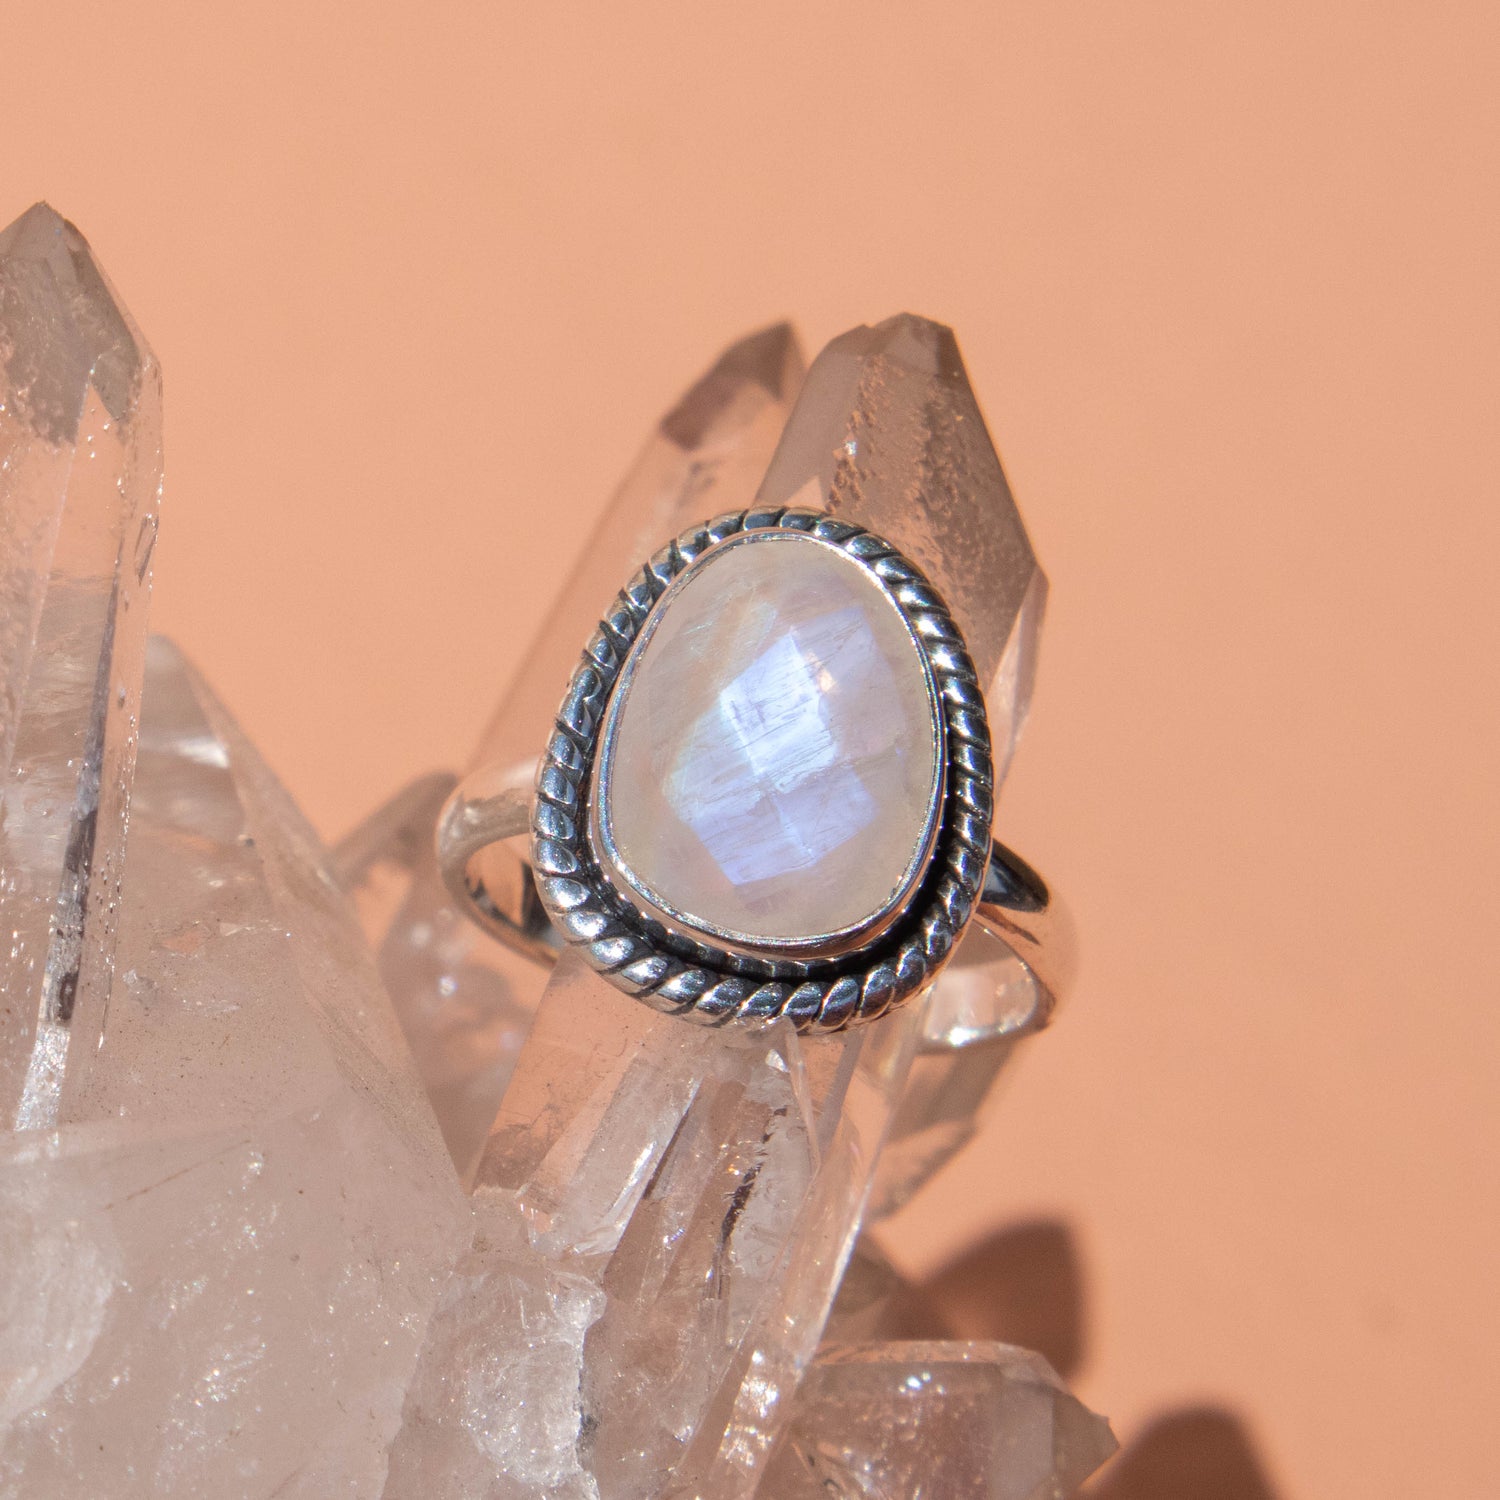 moonstone, rainbow moonstone, rainbow moonstone ring, sterling silver ring, crystal ring, crystal jewelry, rainbow moonstone jewelry, gemstone jewelry, gemstone ring, rainbow moonstone crystal, rainbow moonstone stone, rainbow moonstone properties, rainbow moonstone healing properties, rainbow moonstone metaphysical properties, rainbow moonstone meaning